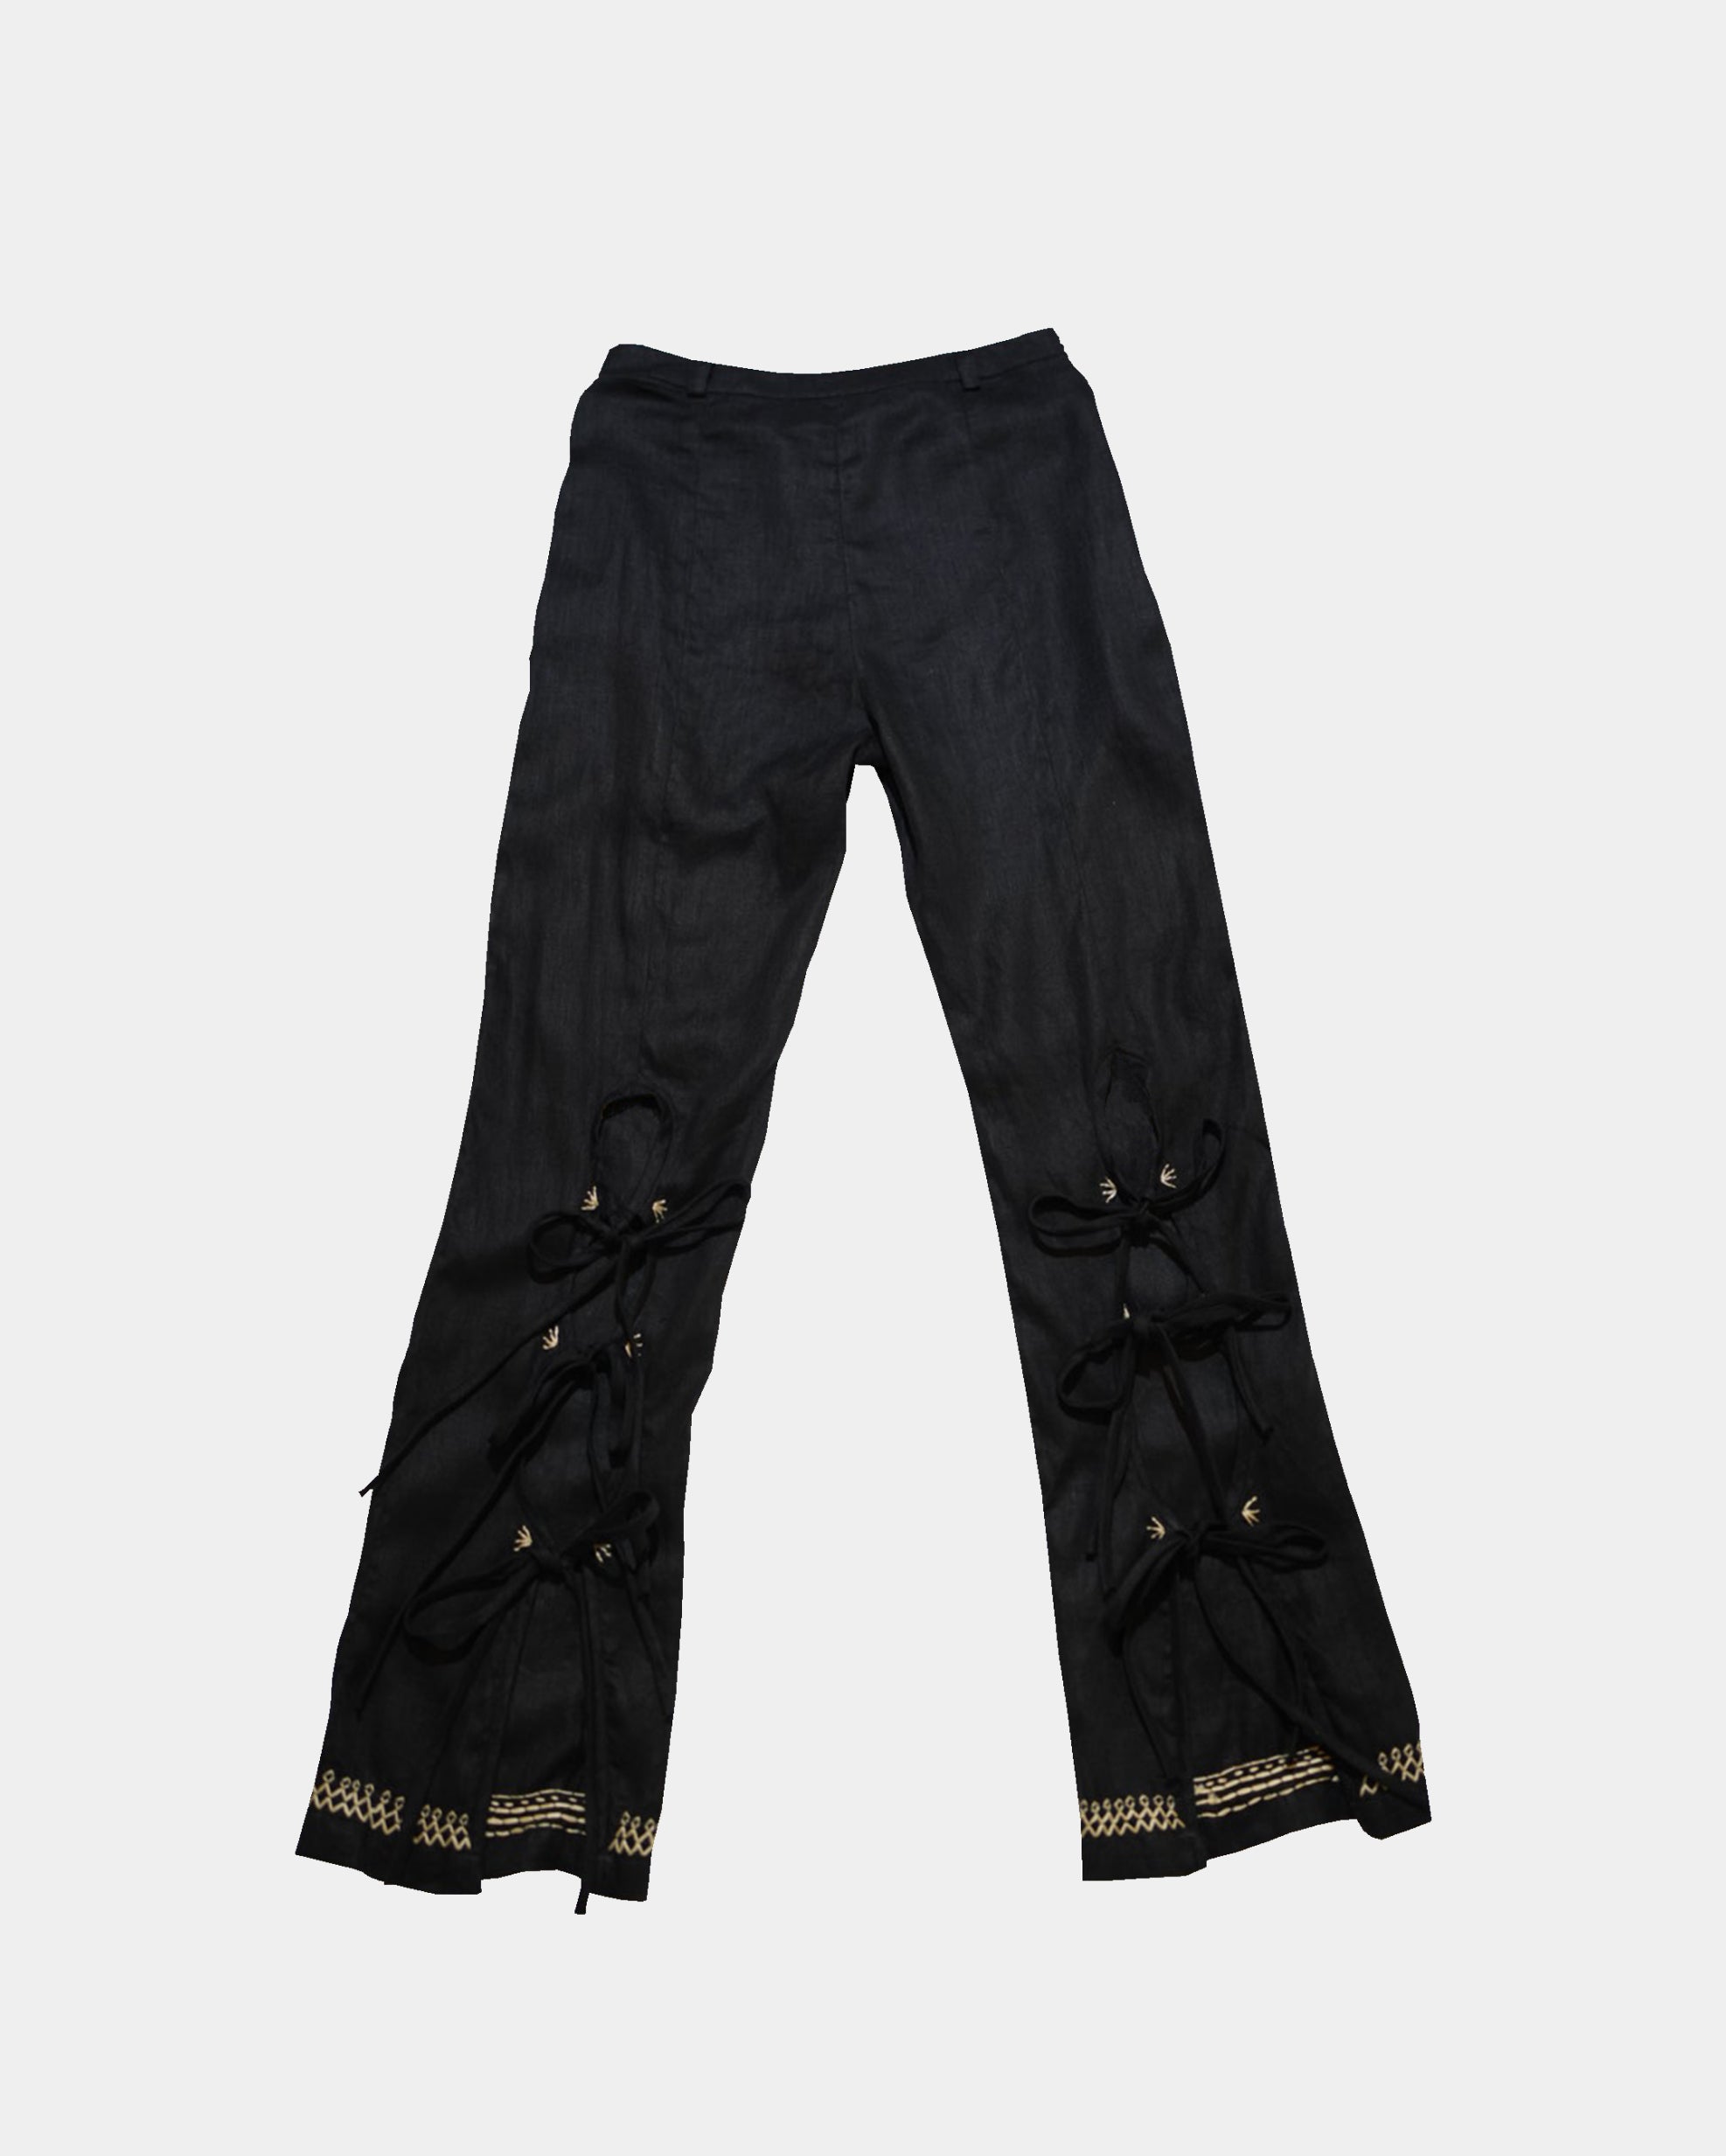 Embroidered Tie Trousers